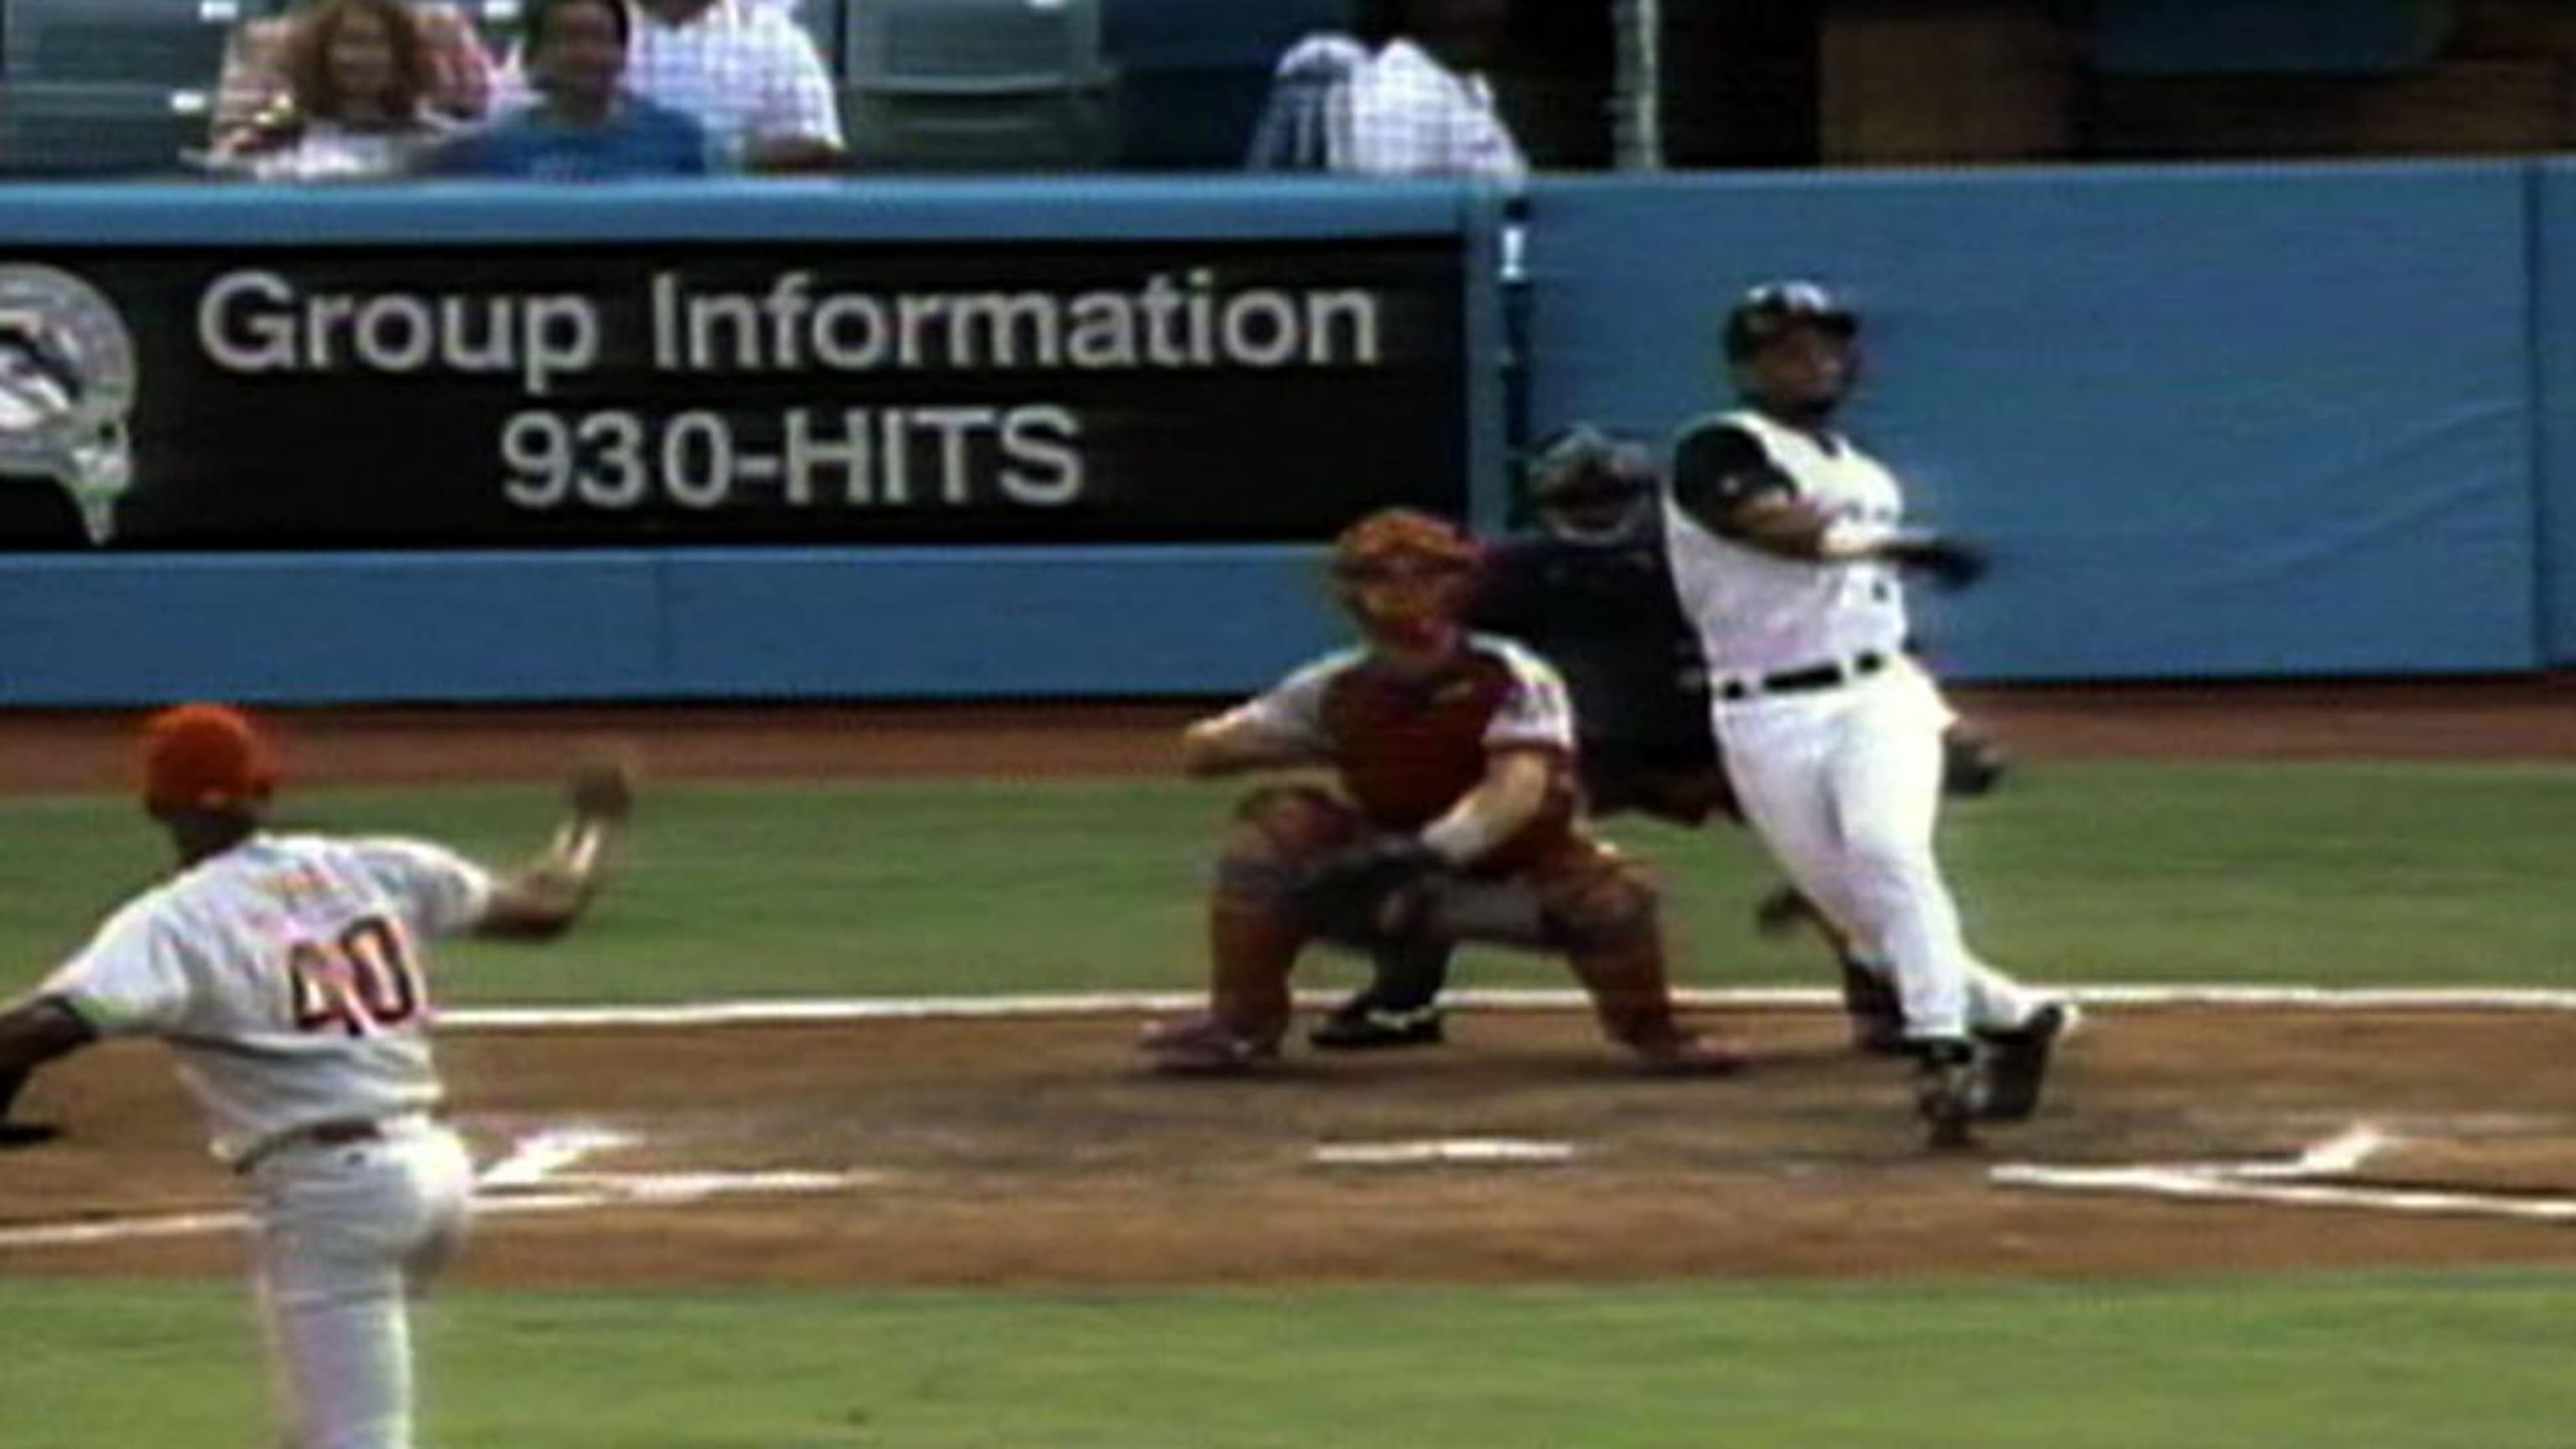 Gary Sheffield's top moments